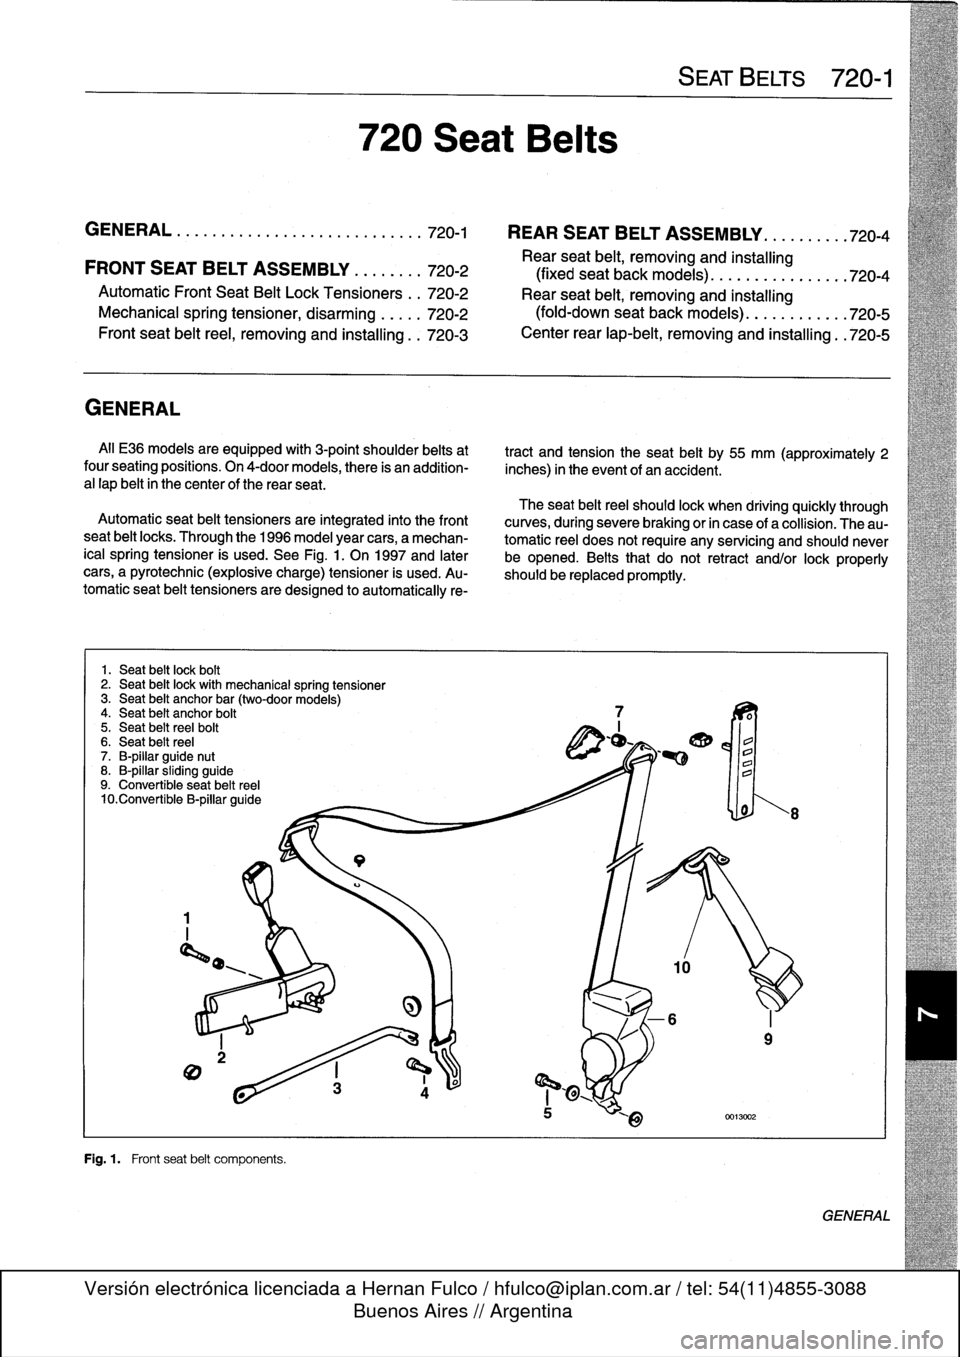 BMW 318i 1998 E36 Service Manual 
GENERAL
.
.
.....
.
.
.
.
.
.
.
.
.
............
720-1

	

REAR
SEATBELT
ASSEMBLY
...
.
....
.
.
720-4

Rear
seat
belt,
removing
and
installing
FRONT
SEATBELT
ASSEMBLY
.
.
.
.
.
.
.
.
720-2

	

(fixe